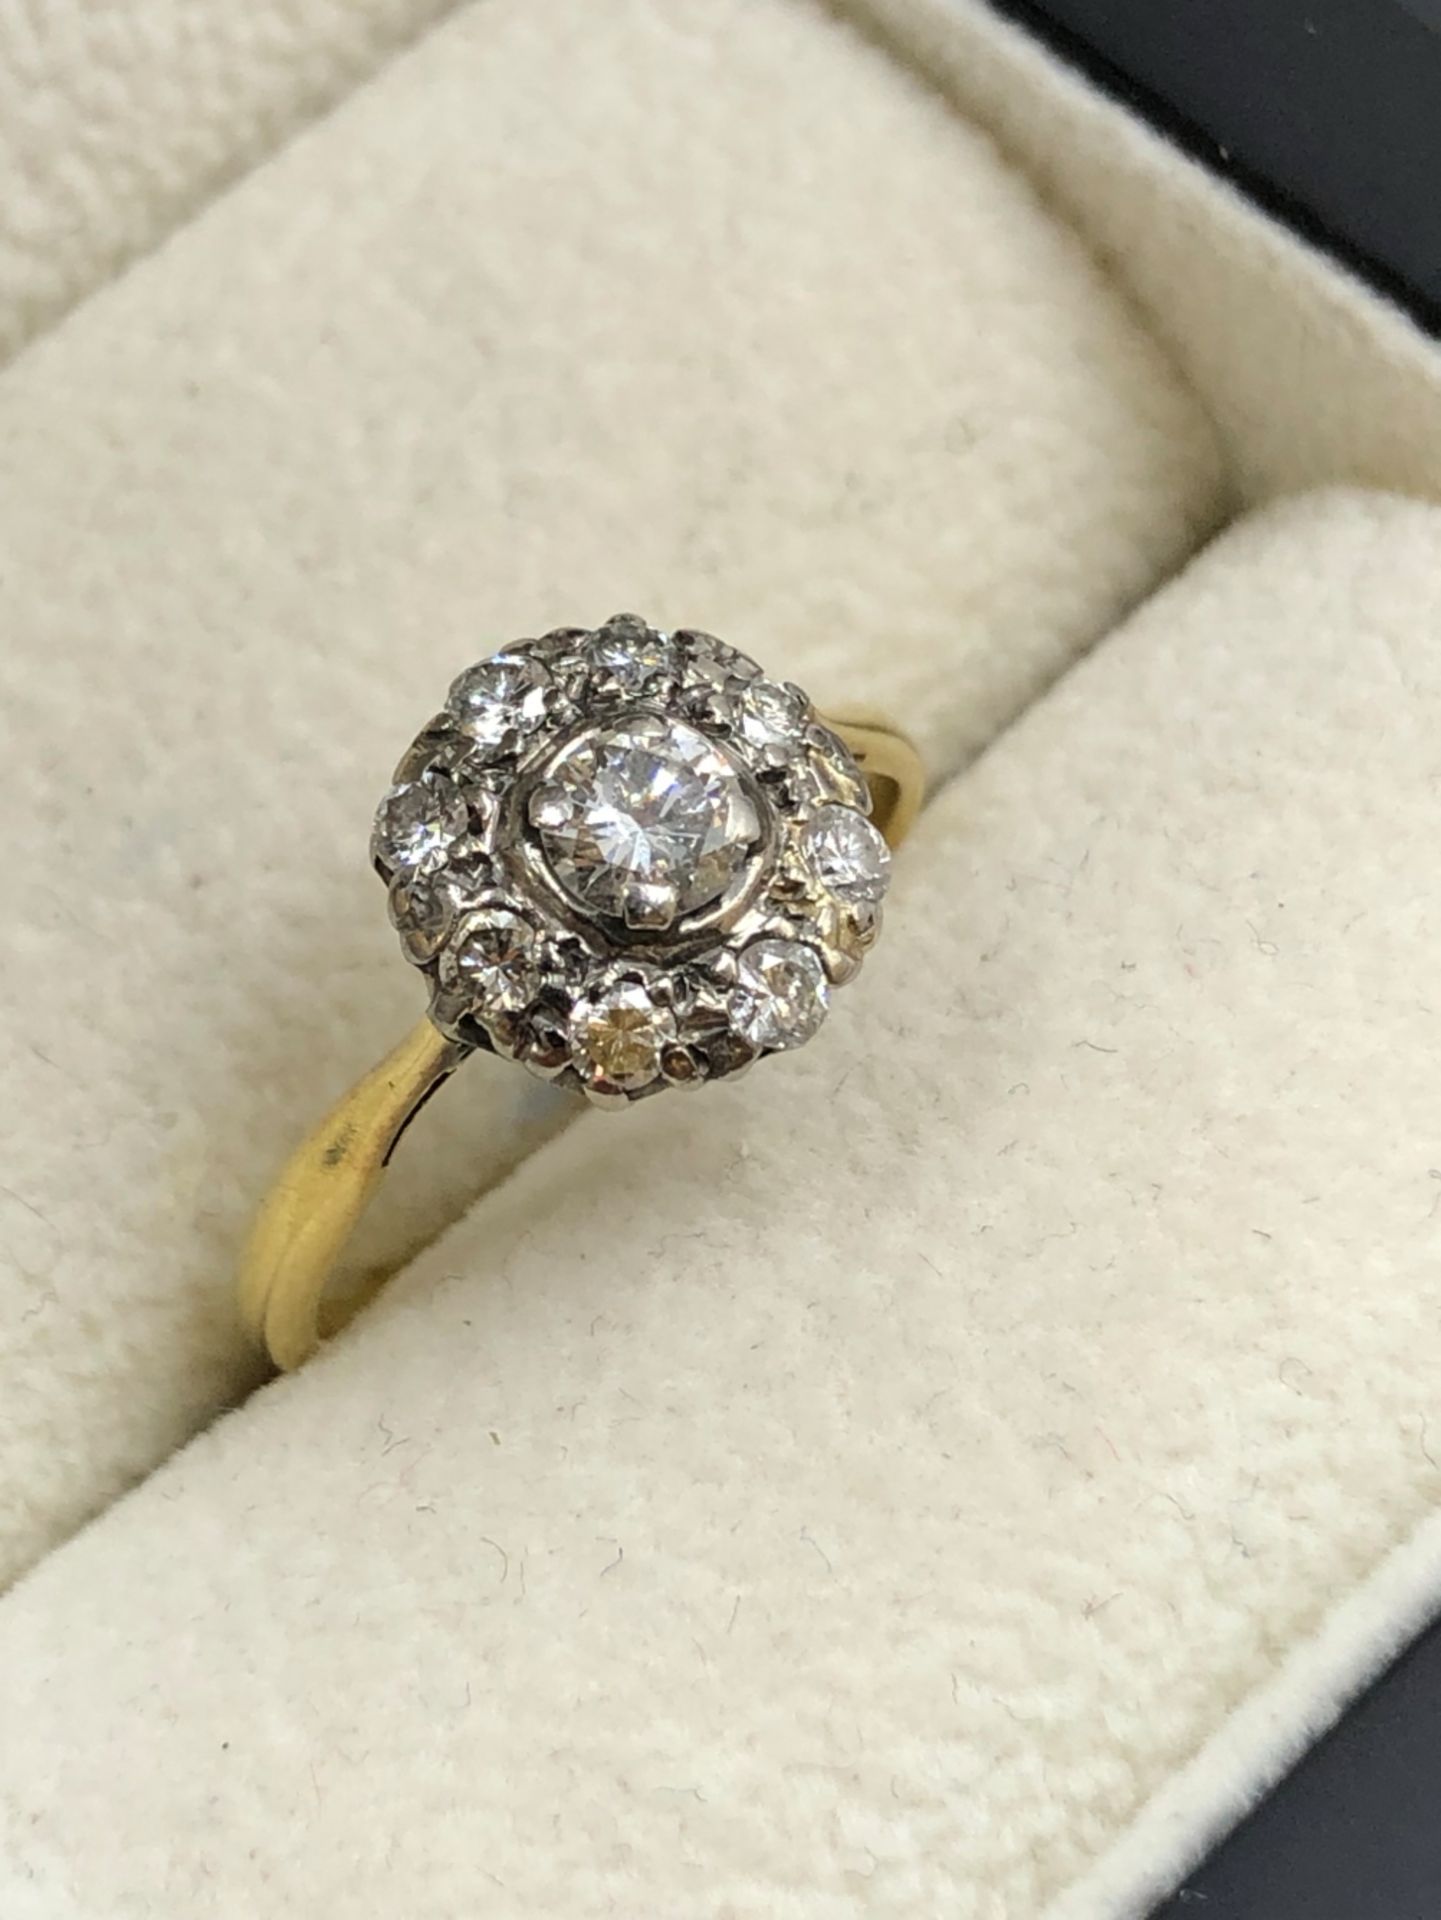 AN ANTIQUE 18ct GOLD AND PLATINUM DIAMOND CLUSTER RING. THE CENTRAL DIAMOND MEASURING 4.5 X 2.5mm, - Image 2 of 2